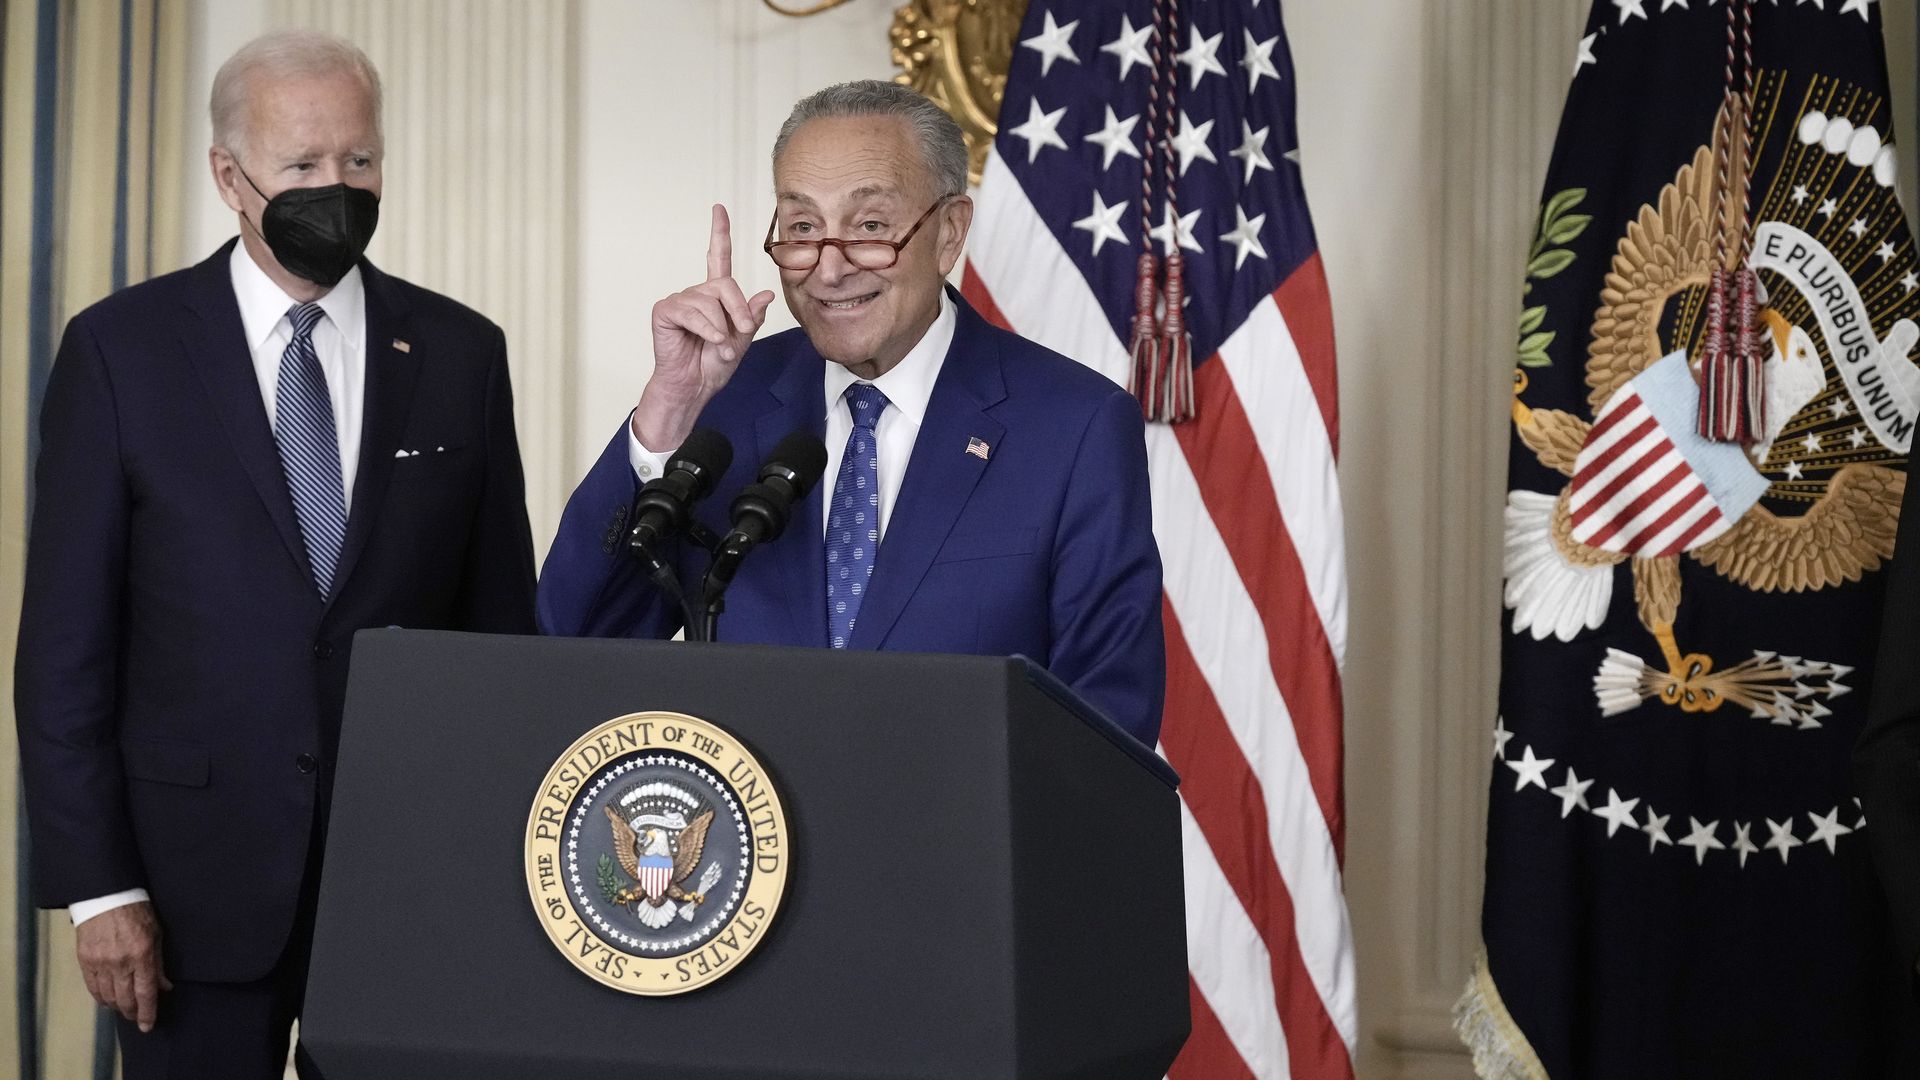 Senate Majority Leader Charles Schumer (D-NY) speaks during the signing ceremony for The Inflation Reduction Act with President Joe Biden at the White House. 